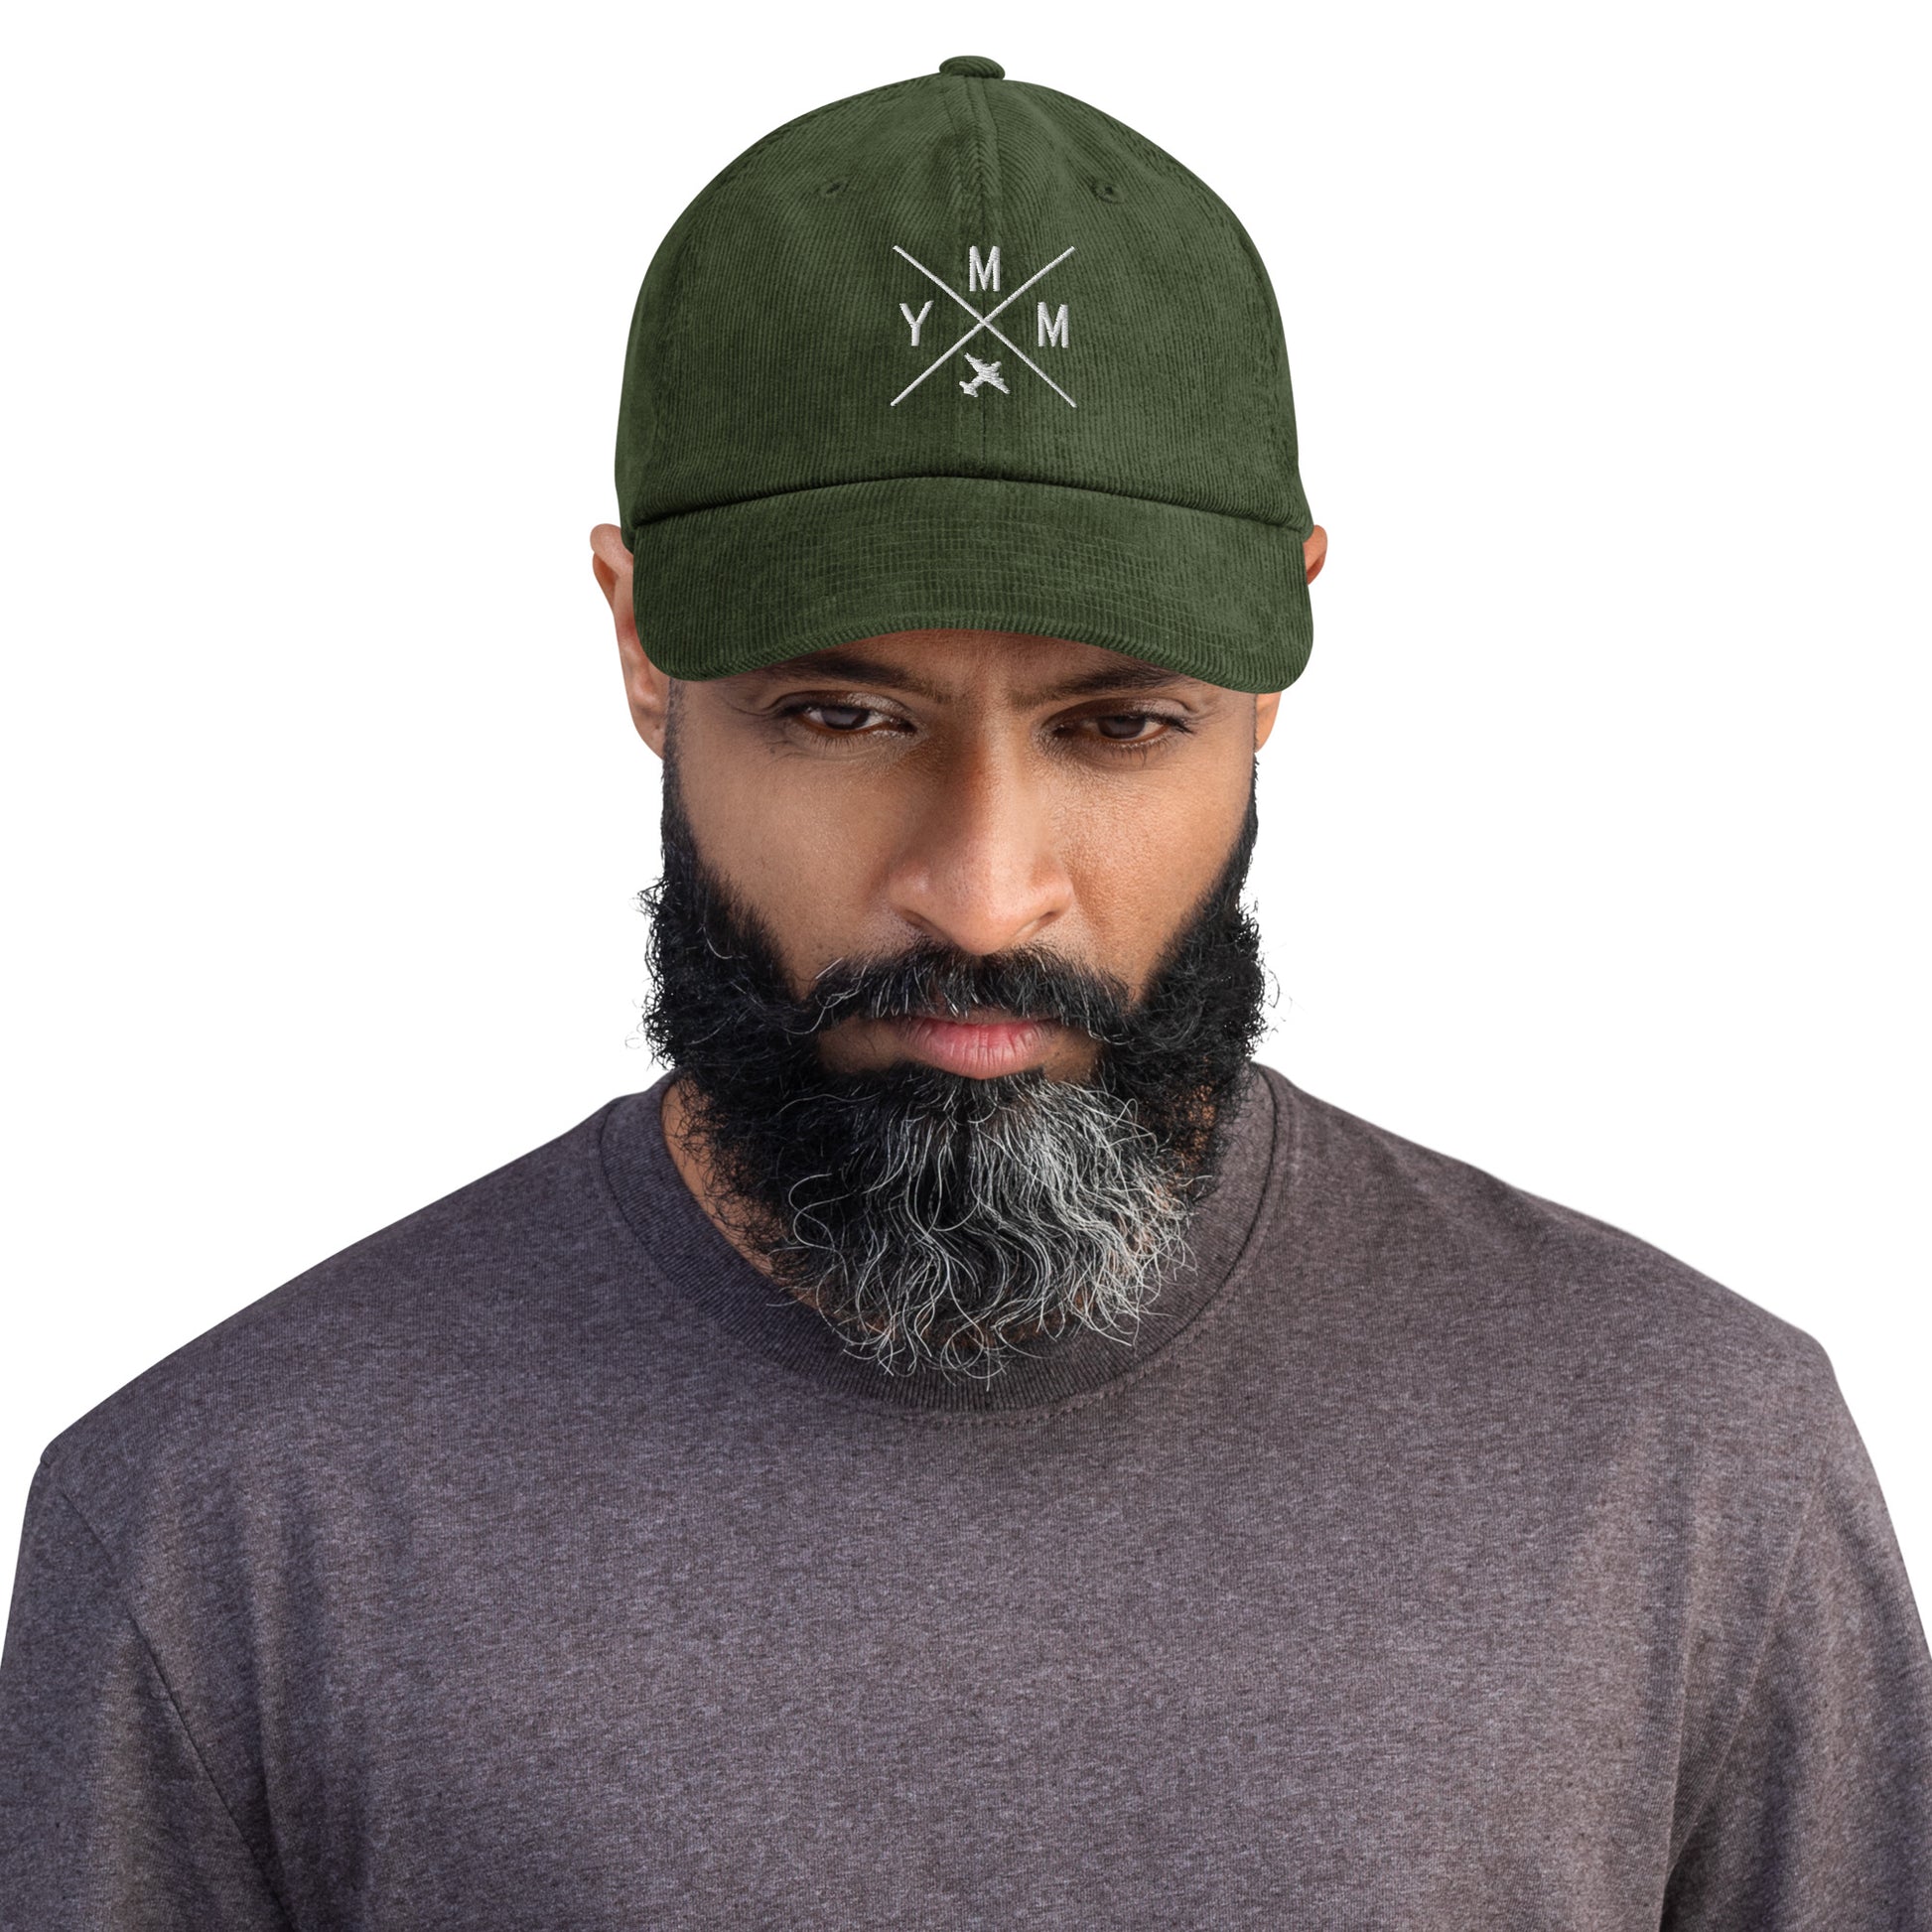 Crossed-X Corduroy Hat - White • YMM Fort McMurray • YHM Designs - Image 07